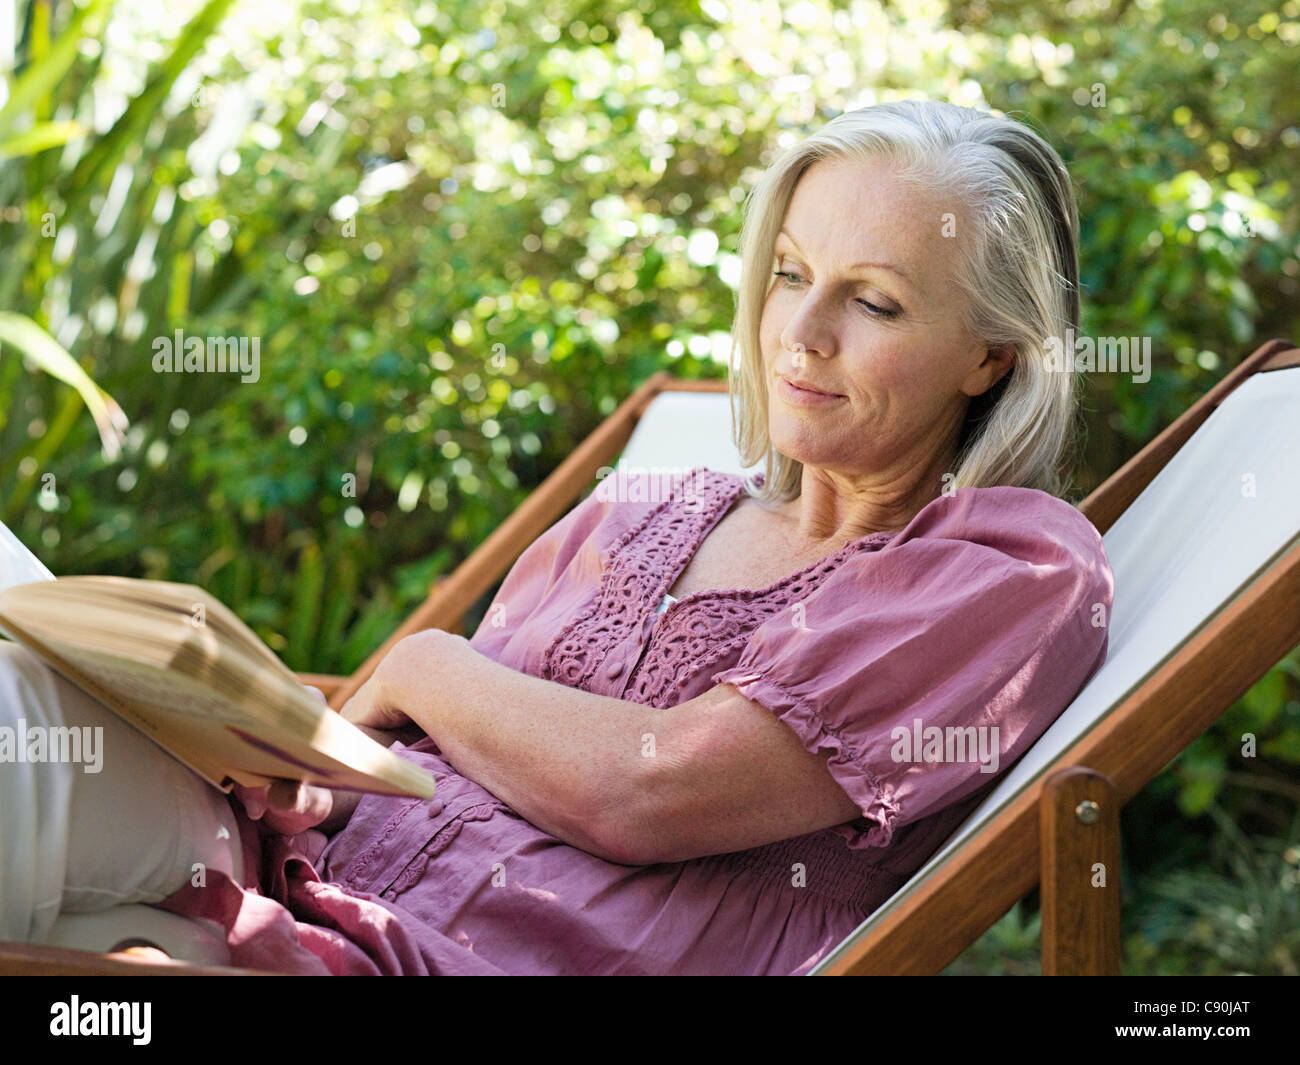 Woman sitting on deckchair in garden with book Stock Photo